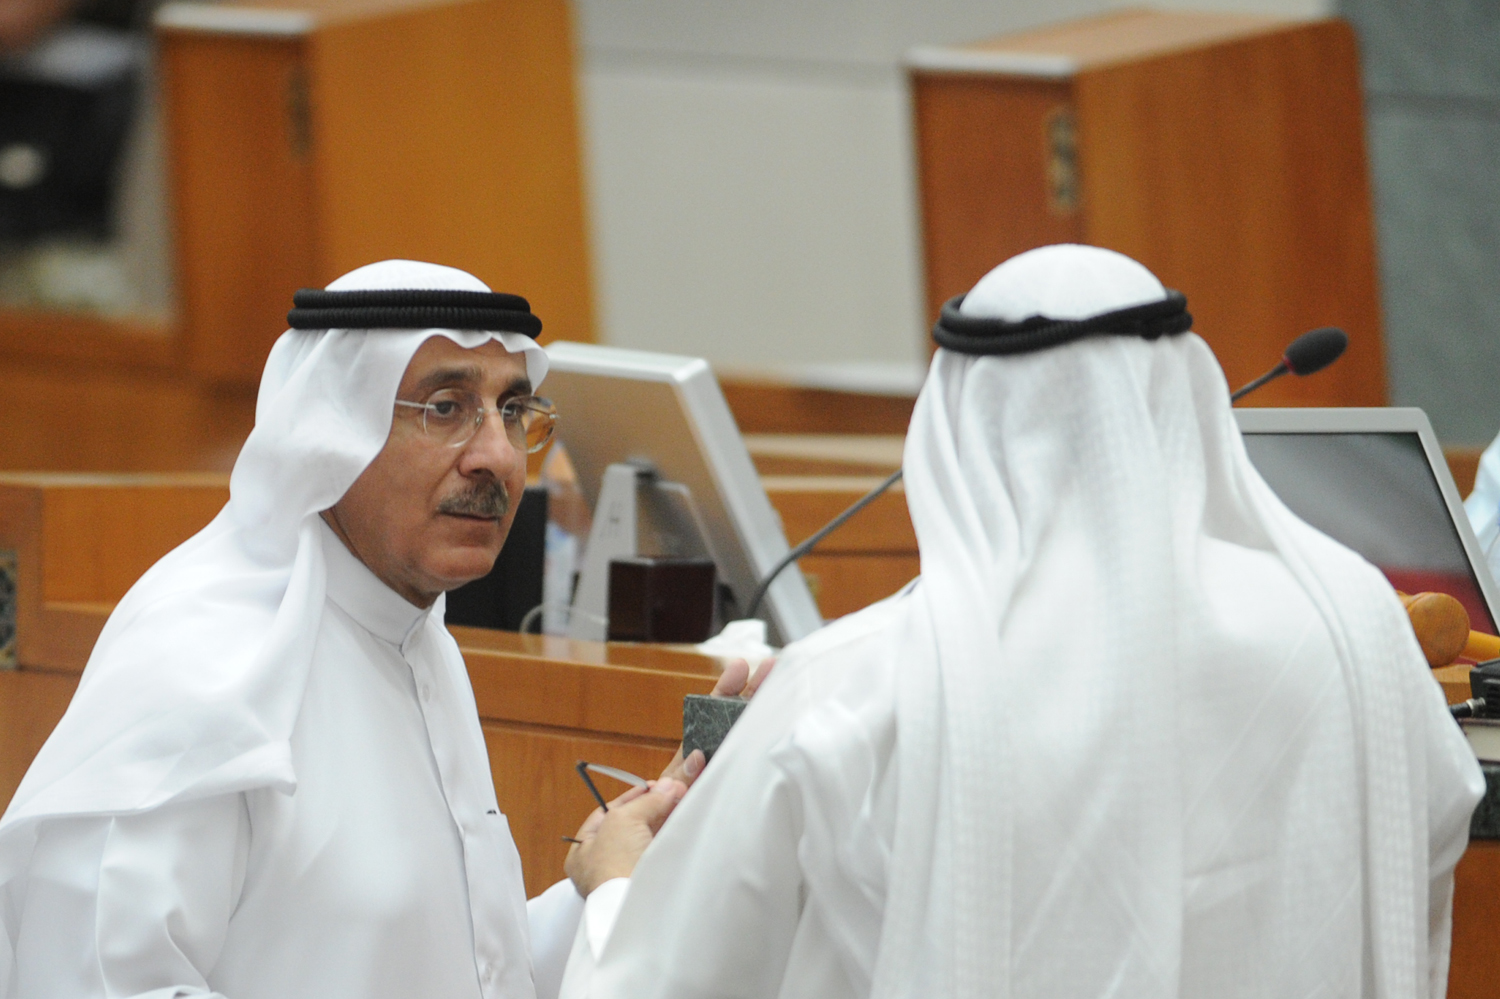 Minister of Electricity and Water Ahmad Al-Jassar during the parliamentary session